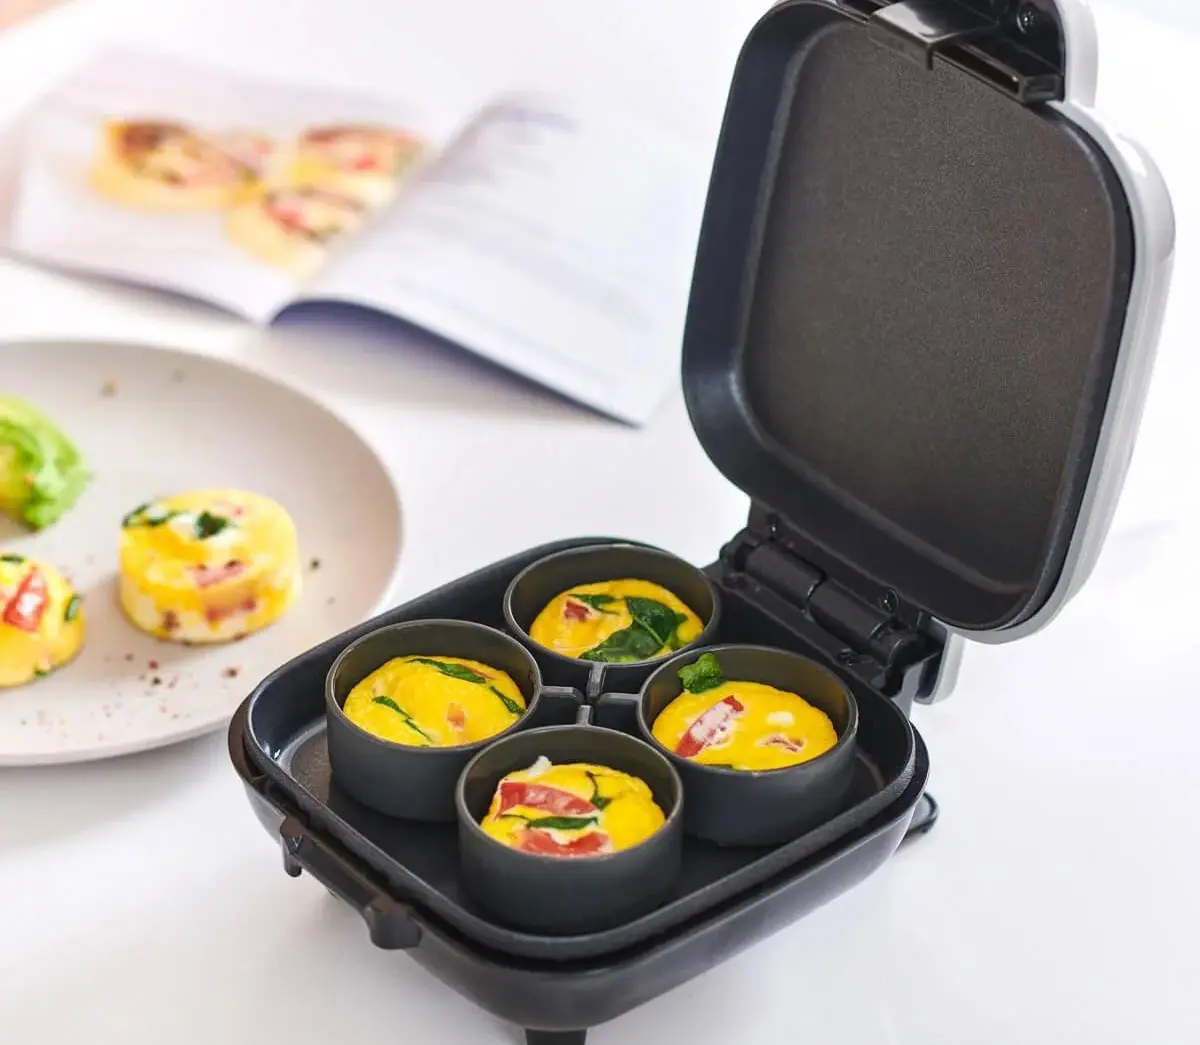 7 Best Egg Bite Makers in 2024 - Tested by Chefs - TheLadyChef